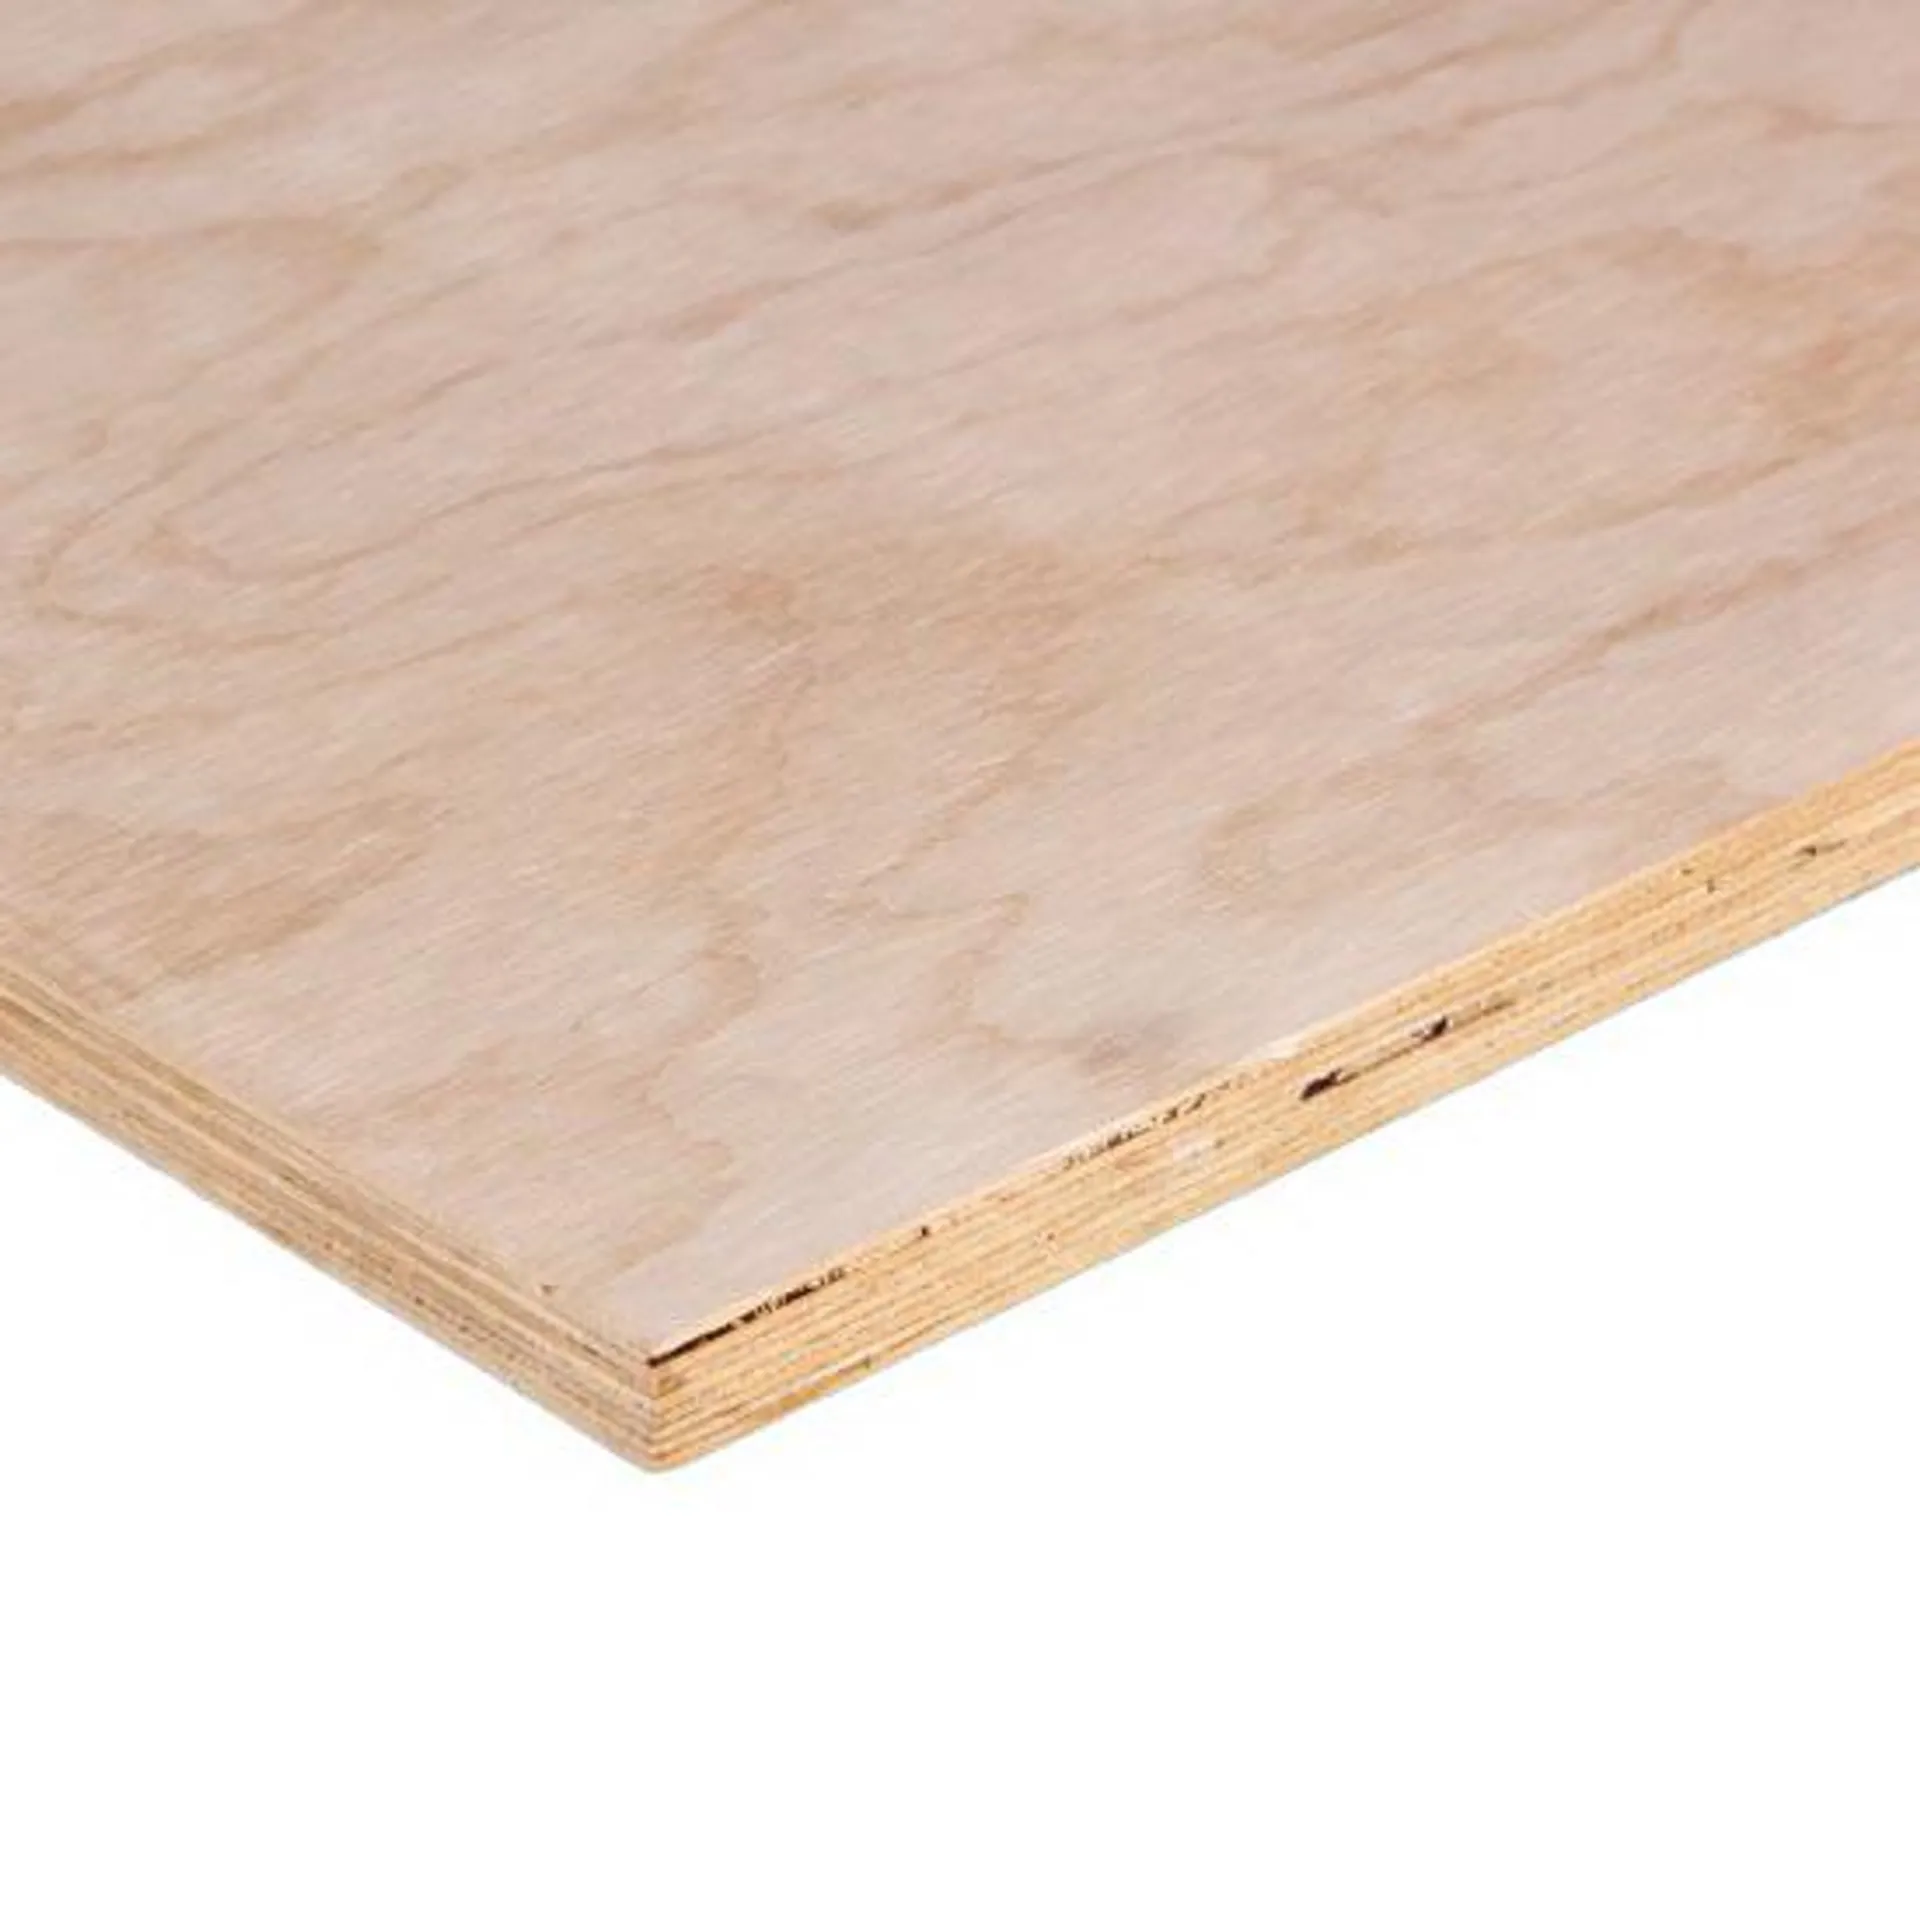 CDX 3-Ply Plywood, 15/32 in x 4 ft x 8 ft - Southern Pine